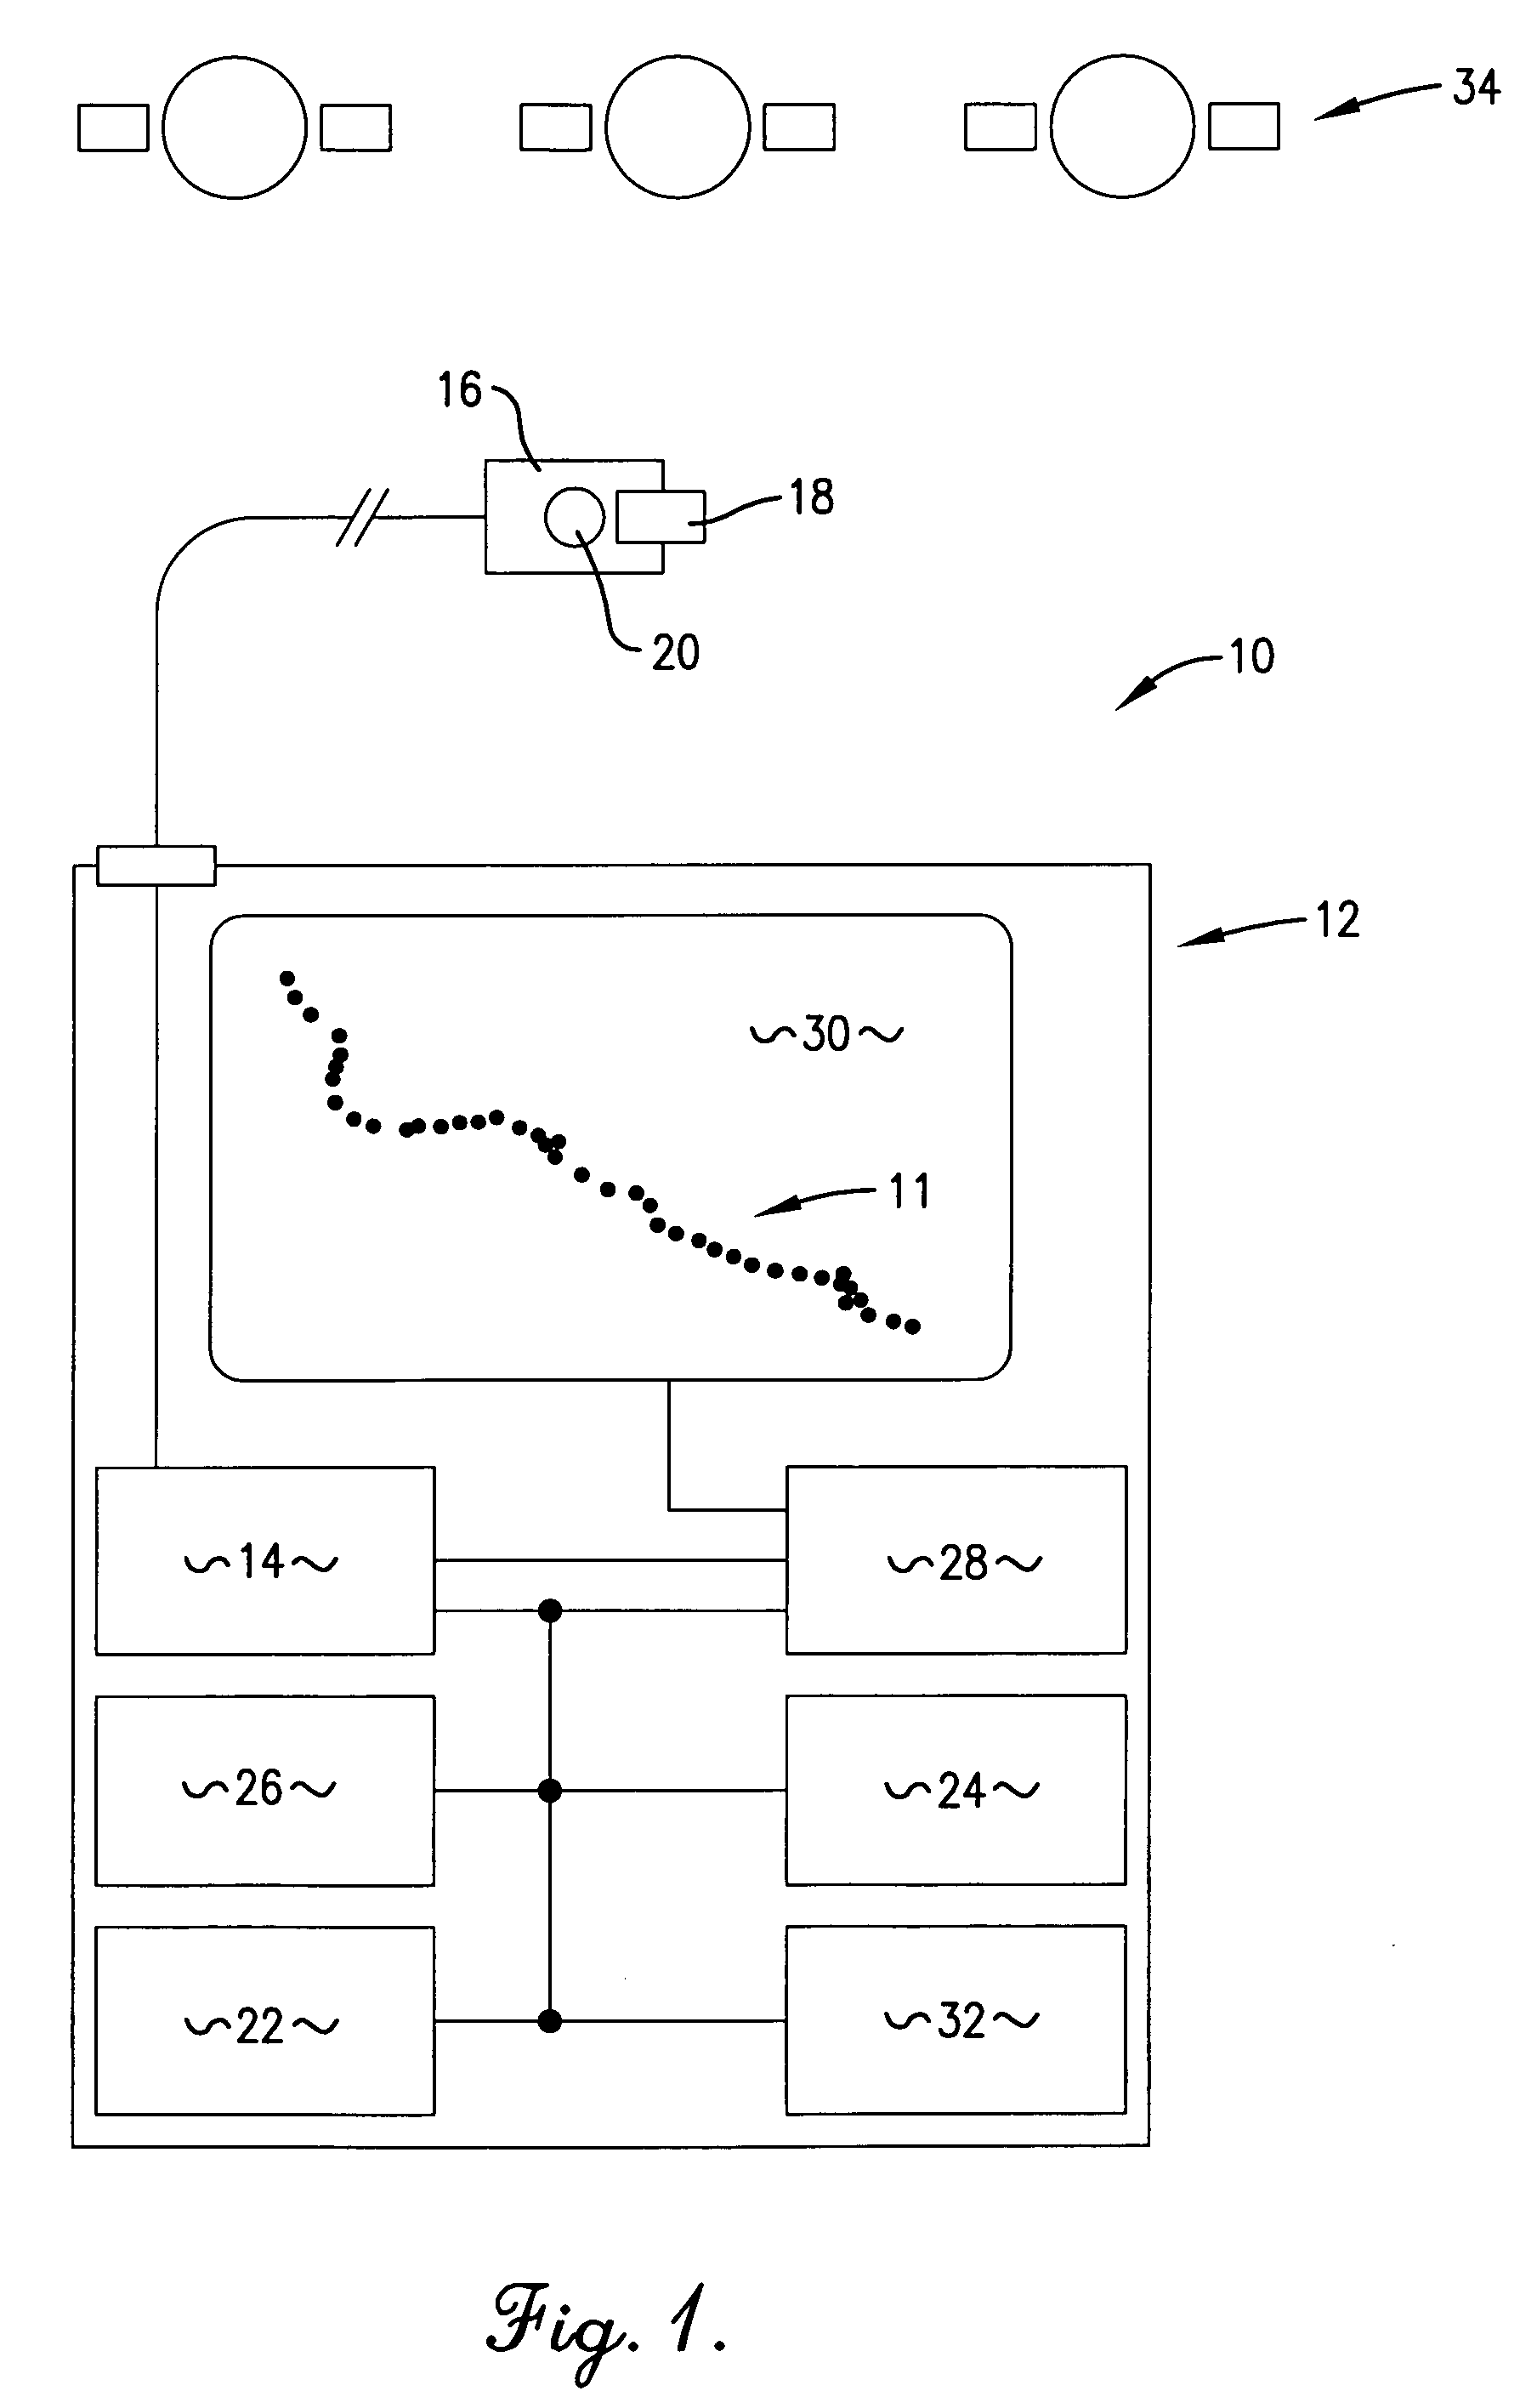 Apparatus and method for allowing user to track path of travel over extended period of time